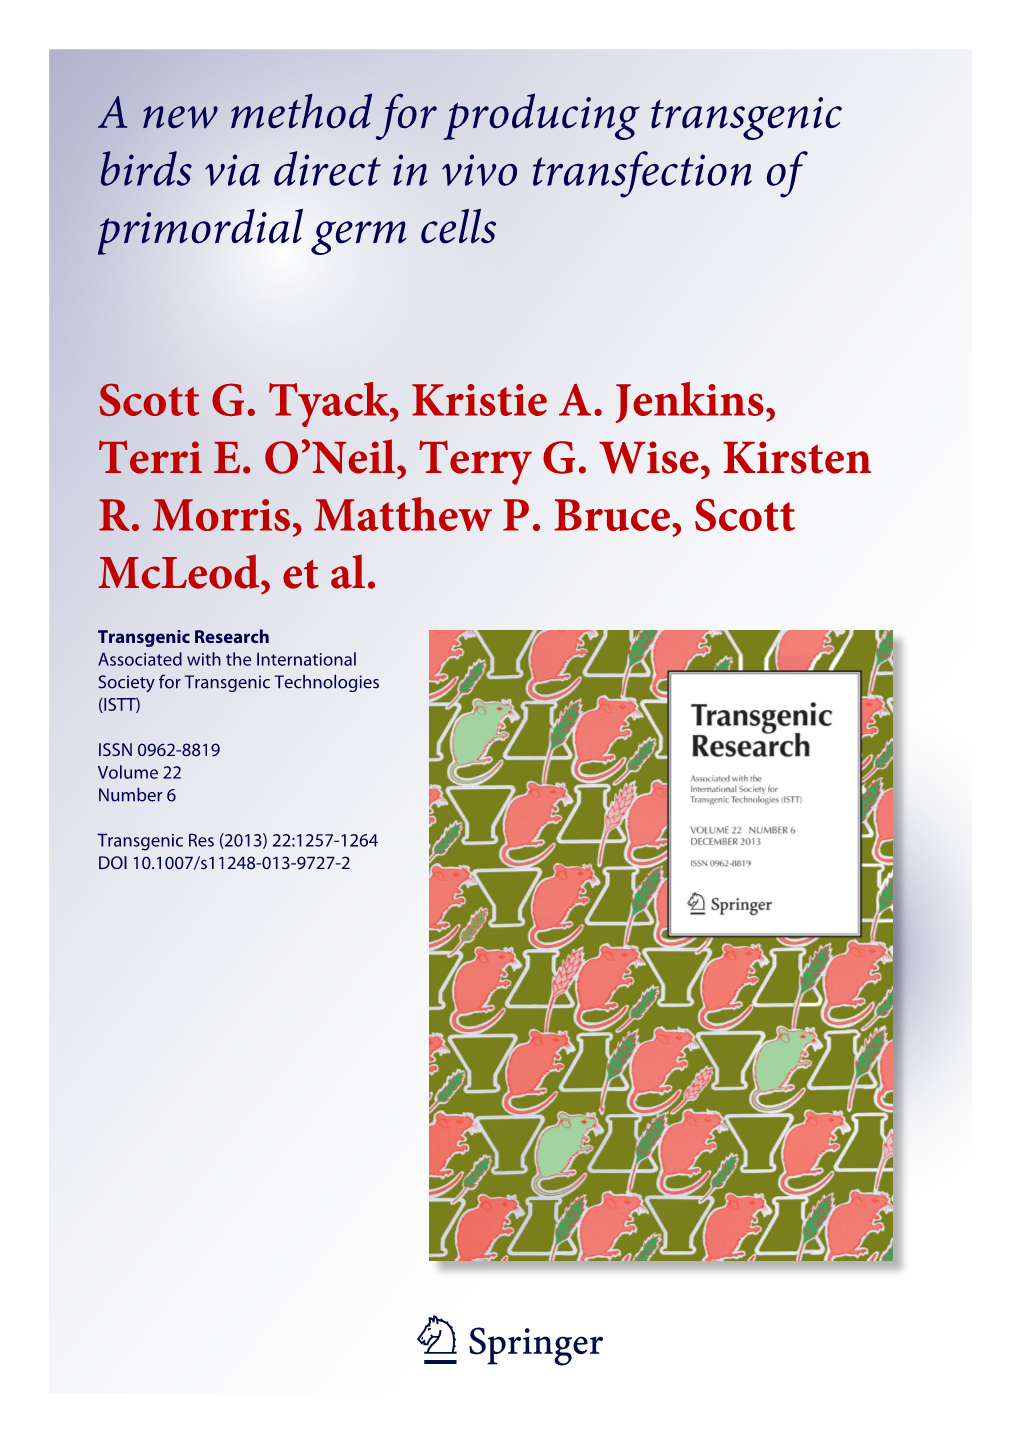 A New Method for Producing Transgenic Birds Via Direct in Vivo Transfection of Primordial Germ Cells